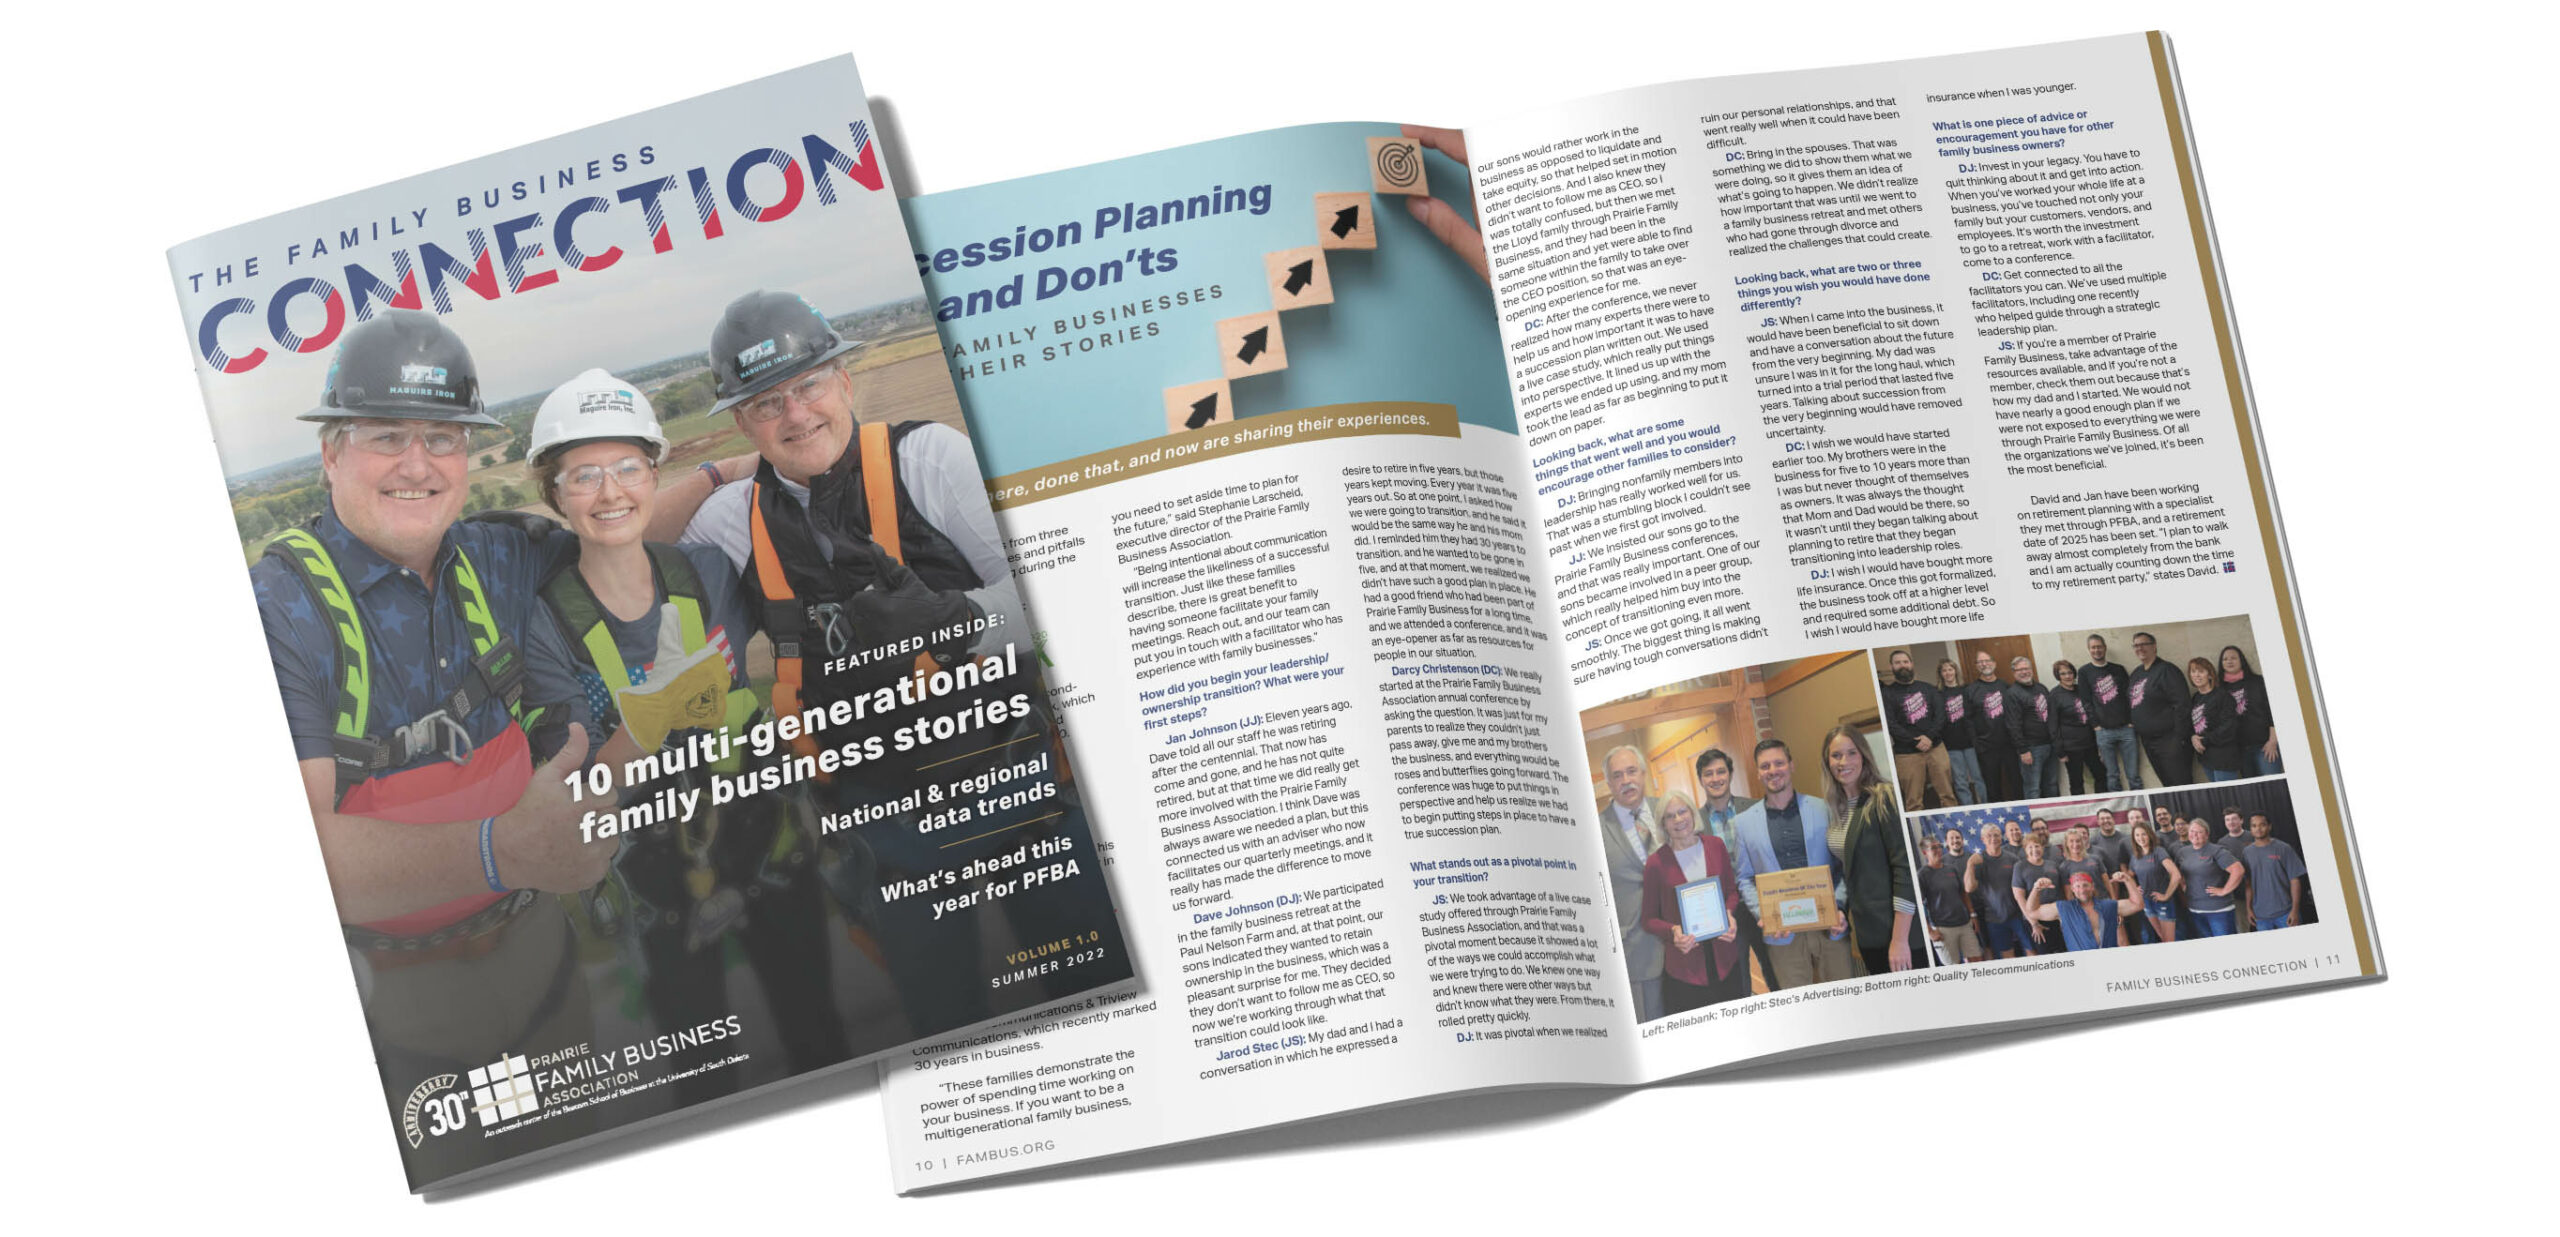 pfba family business connection magazine first edition